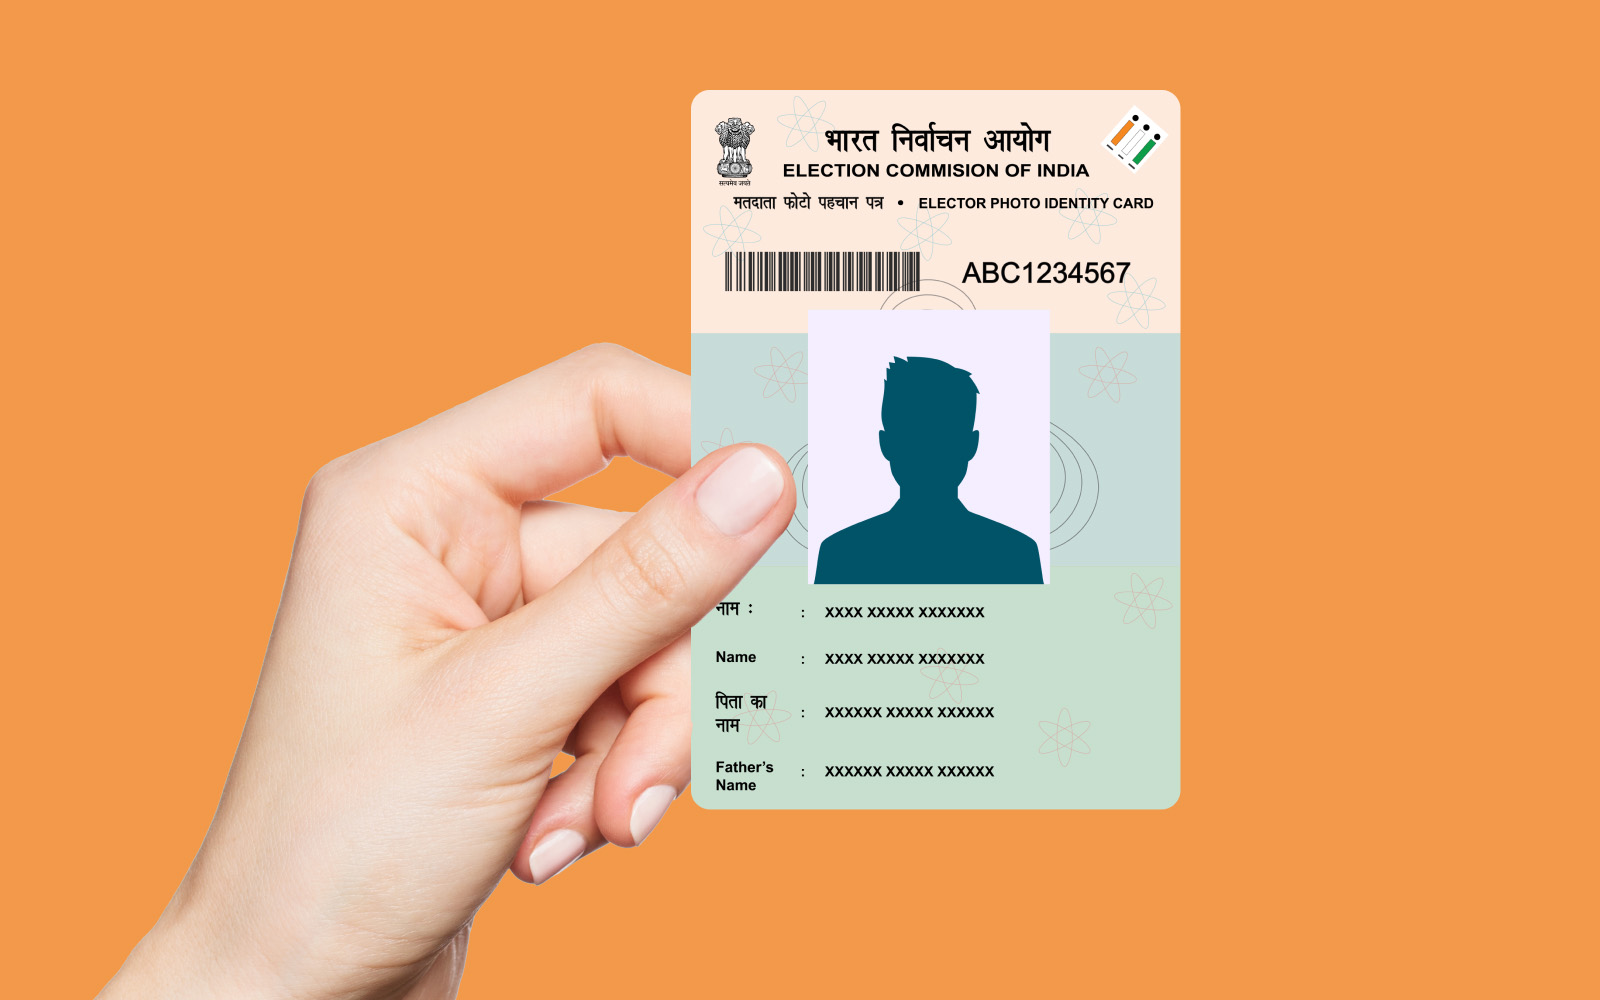 what-is-epic-number-in-your-voter-id-card-paytm-blog